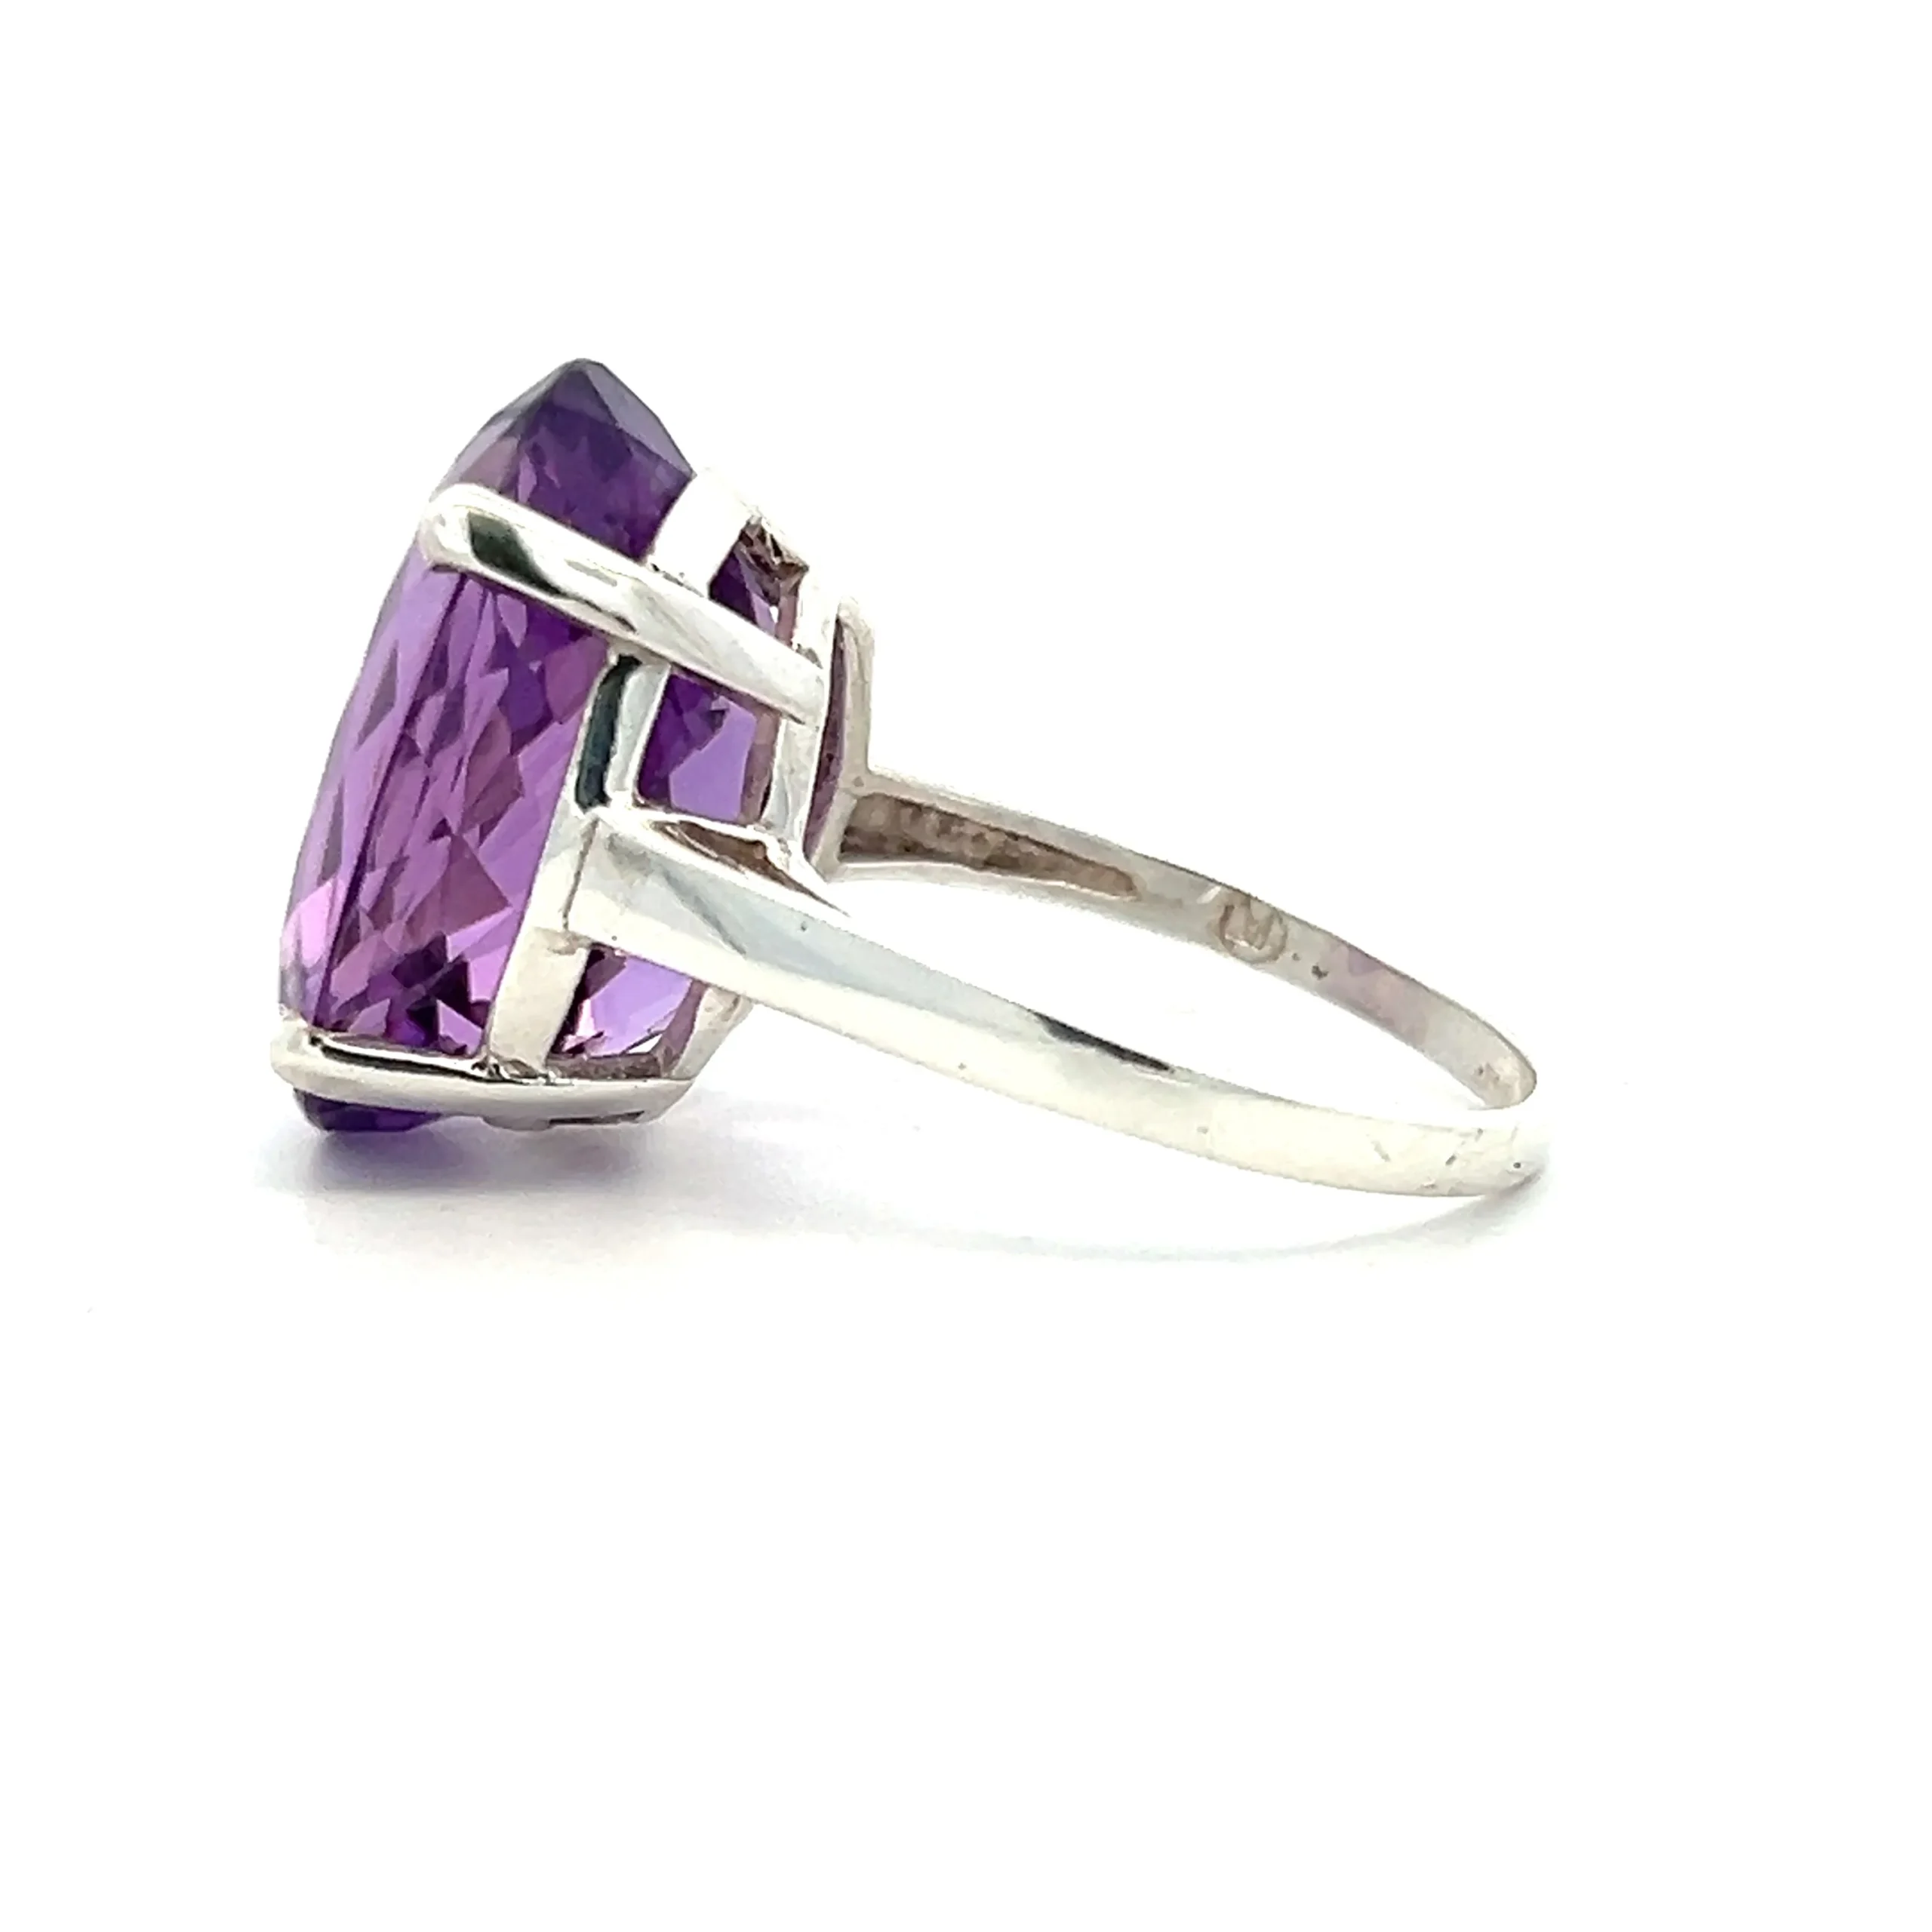 One estate sterling silver solitaire ring containing one oval-shaped faceted amethyst weighing 0.38 carat in a four-prong setting.